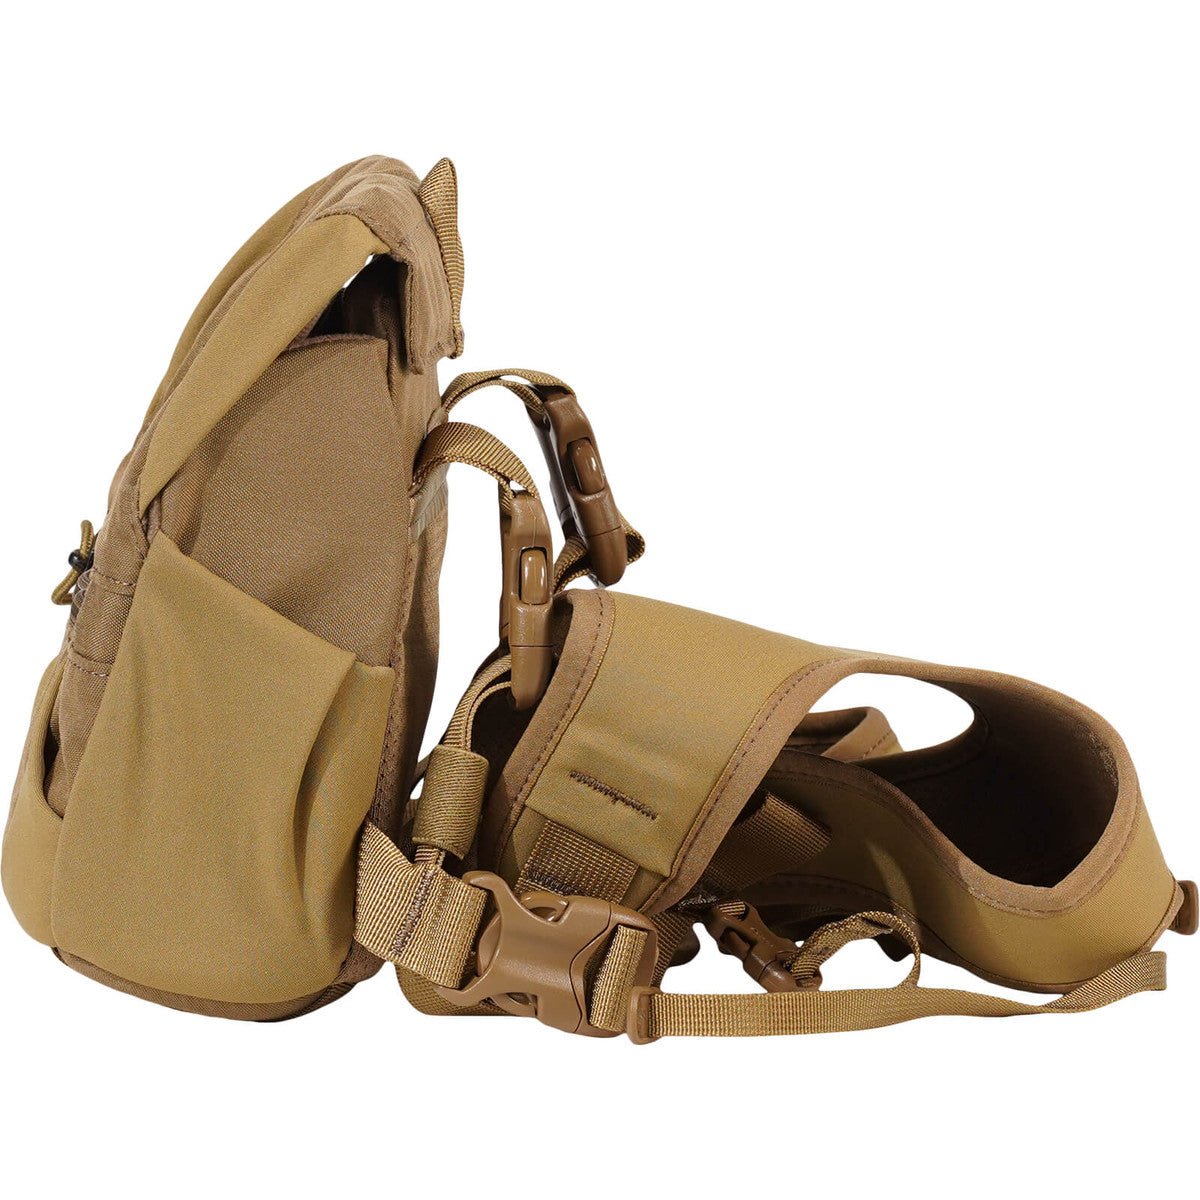 Mystery Ranch Bino Harness 10x - Coyote - XL - Pacific Flyway Supplies